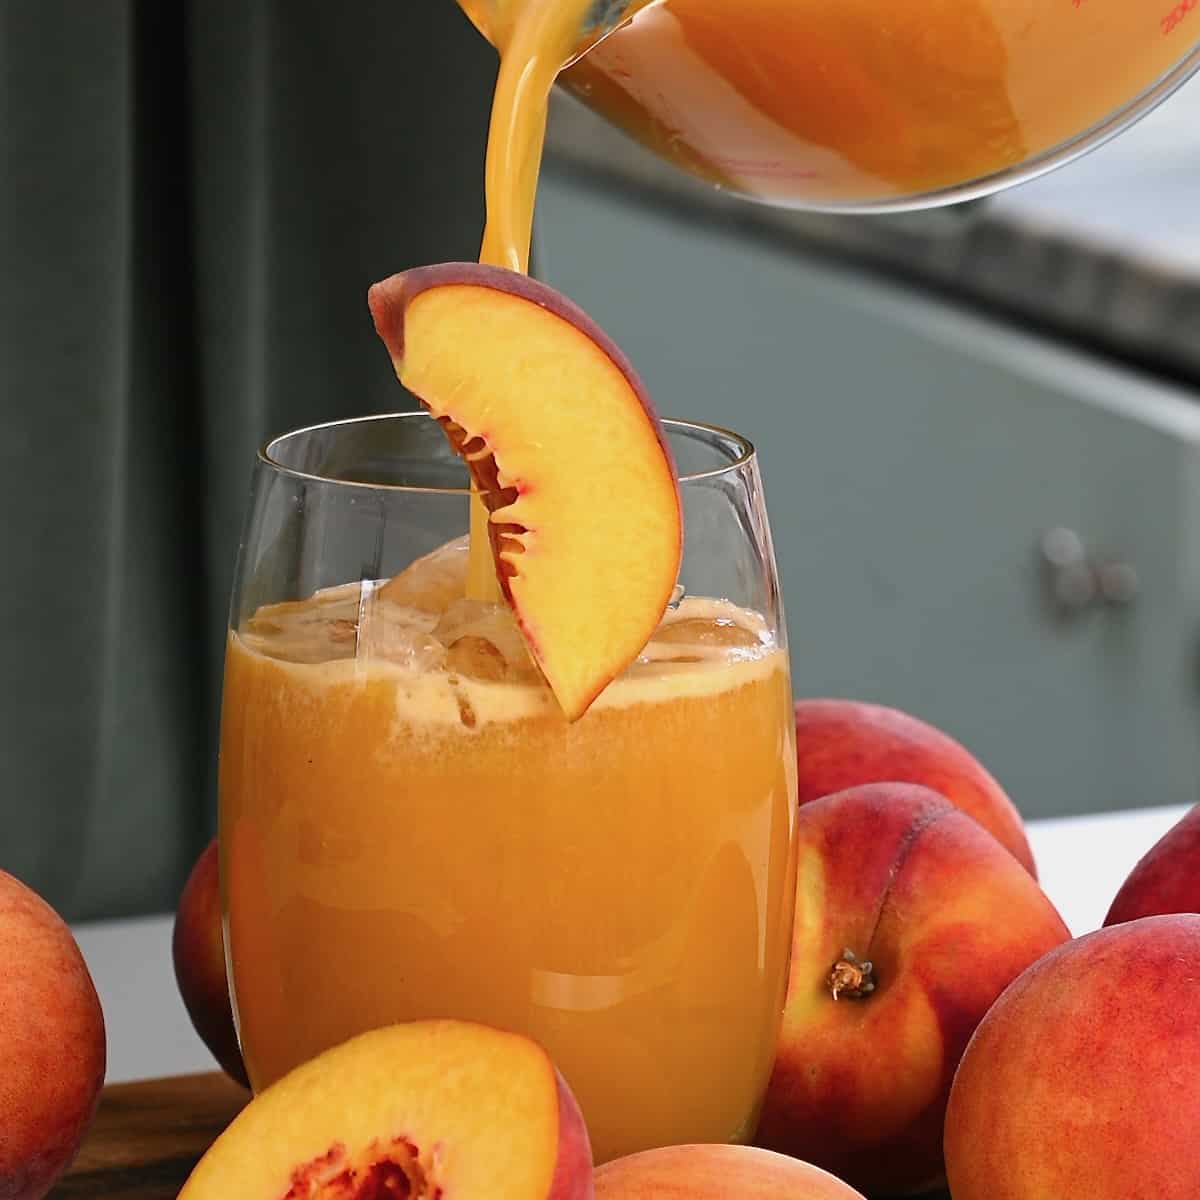 https://www.alphafoodie.com/wp-content/uploads/2022/03/How-to-Make-Peach-Juice-Square.jpeg